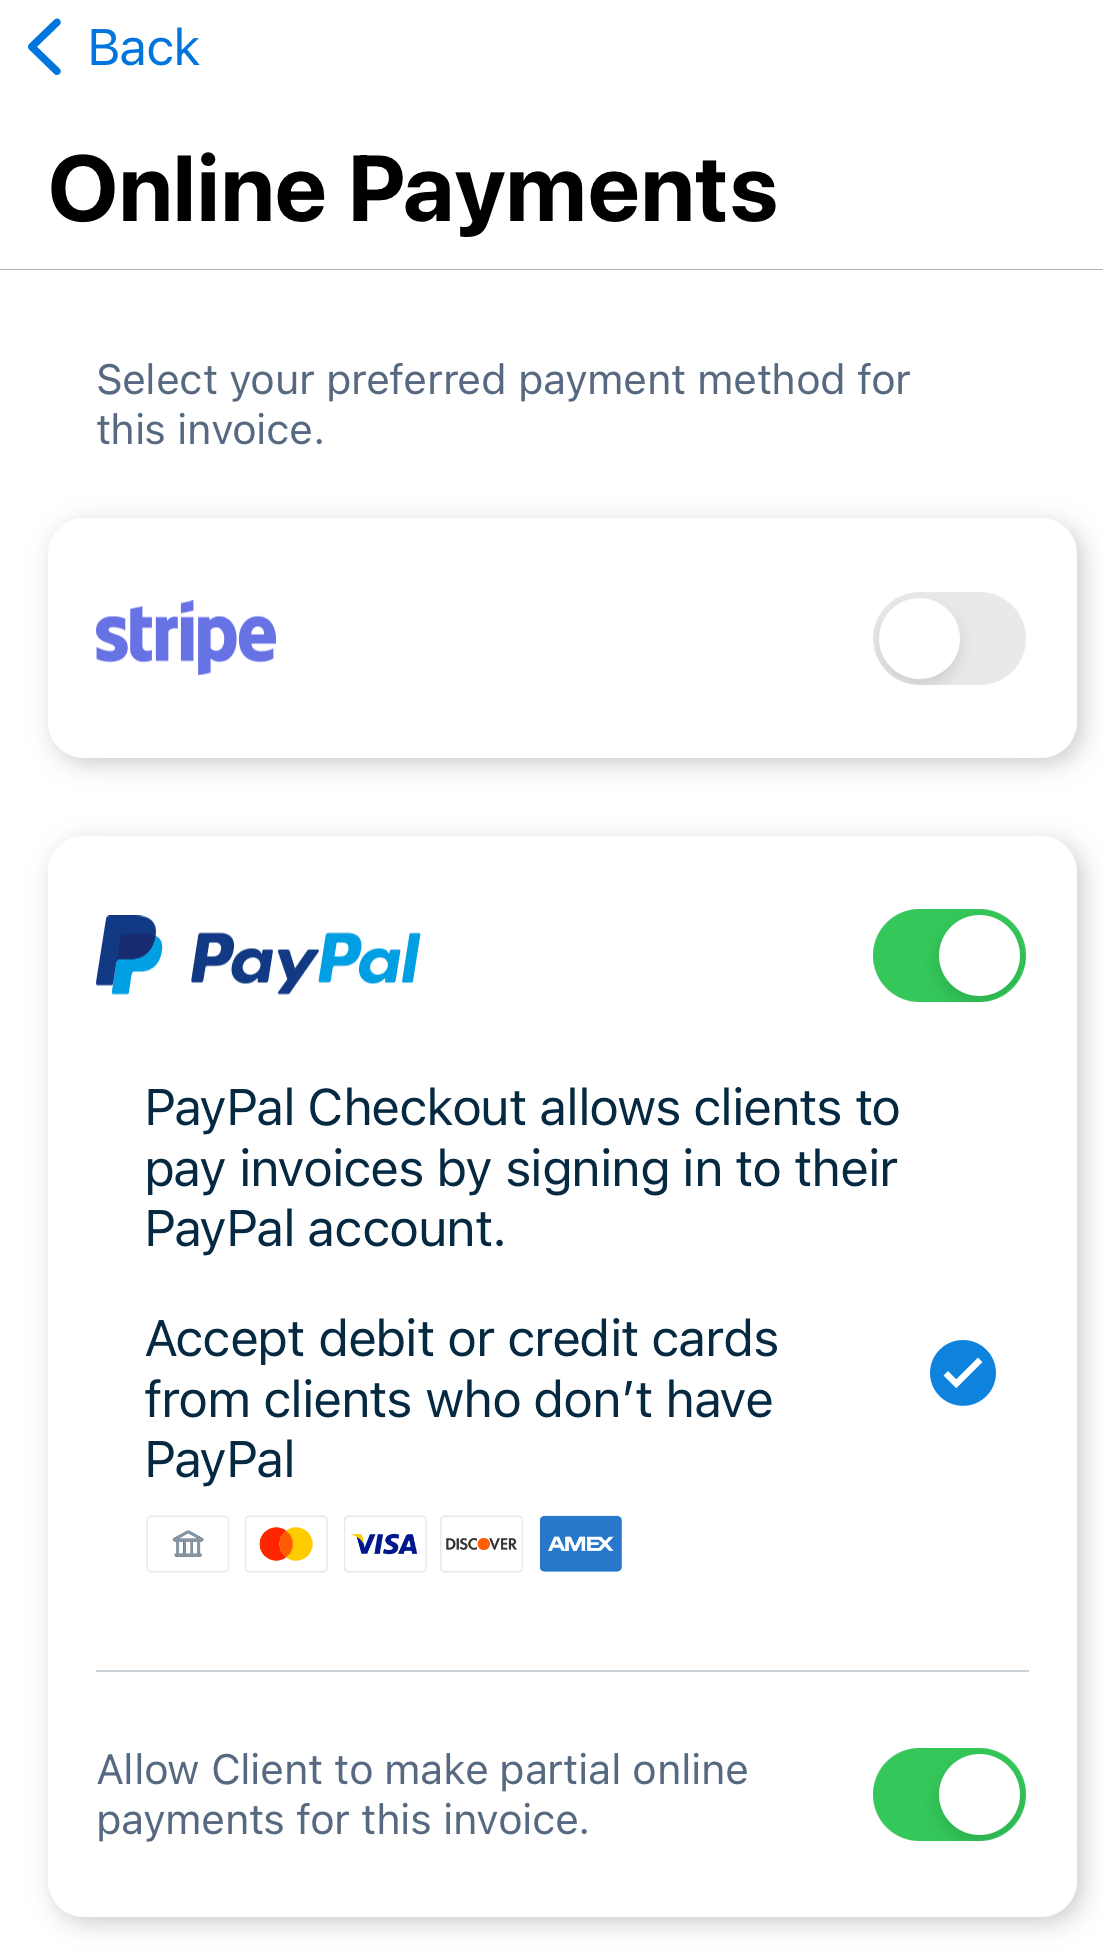 PayPal enabled with option to accept debit or credit card also enabled.